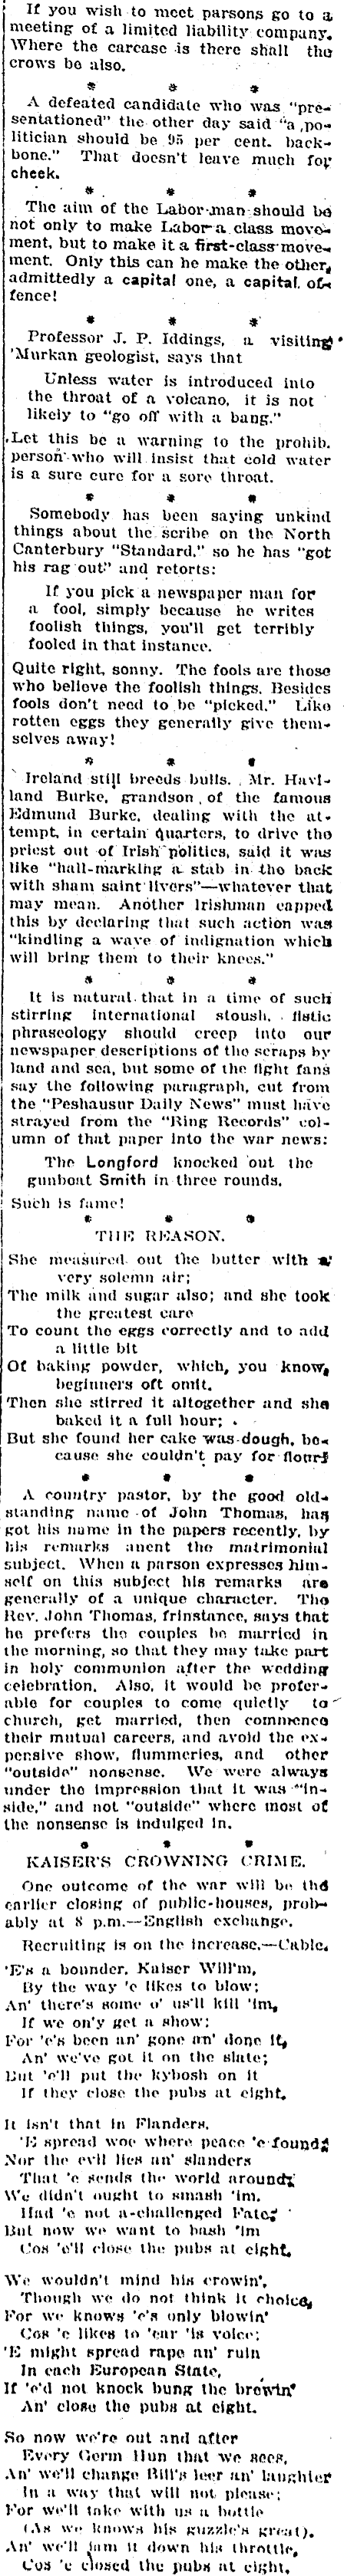 Papers Past Newspapers Nz Truth 1 May 1915 The Critic